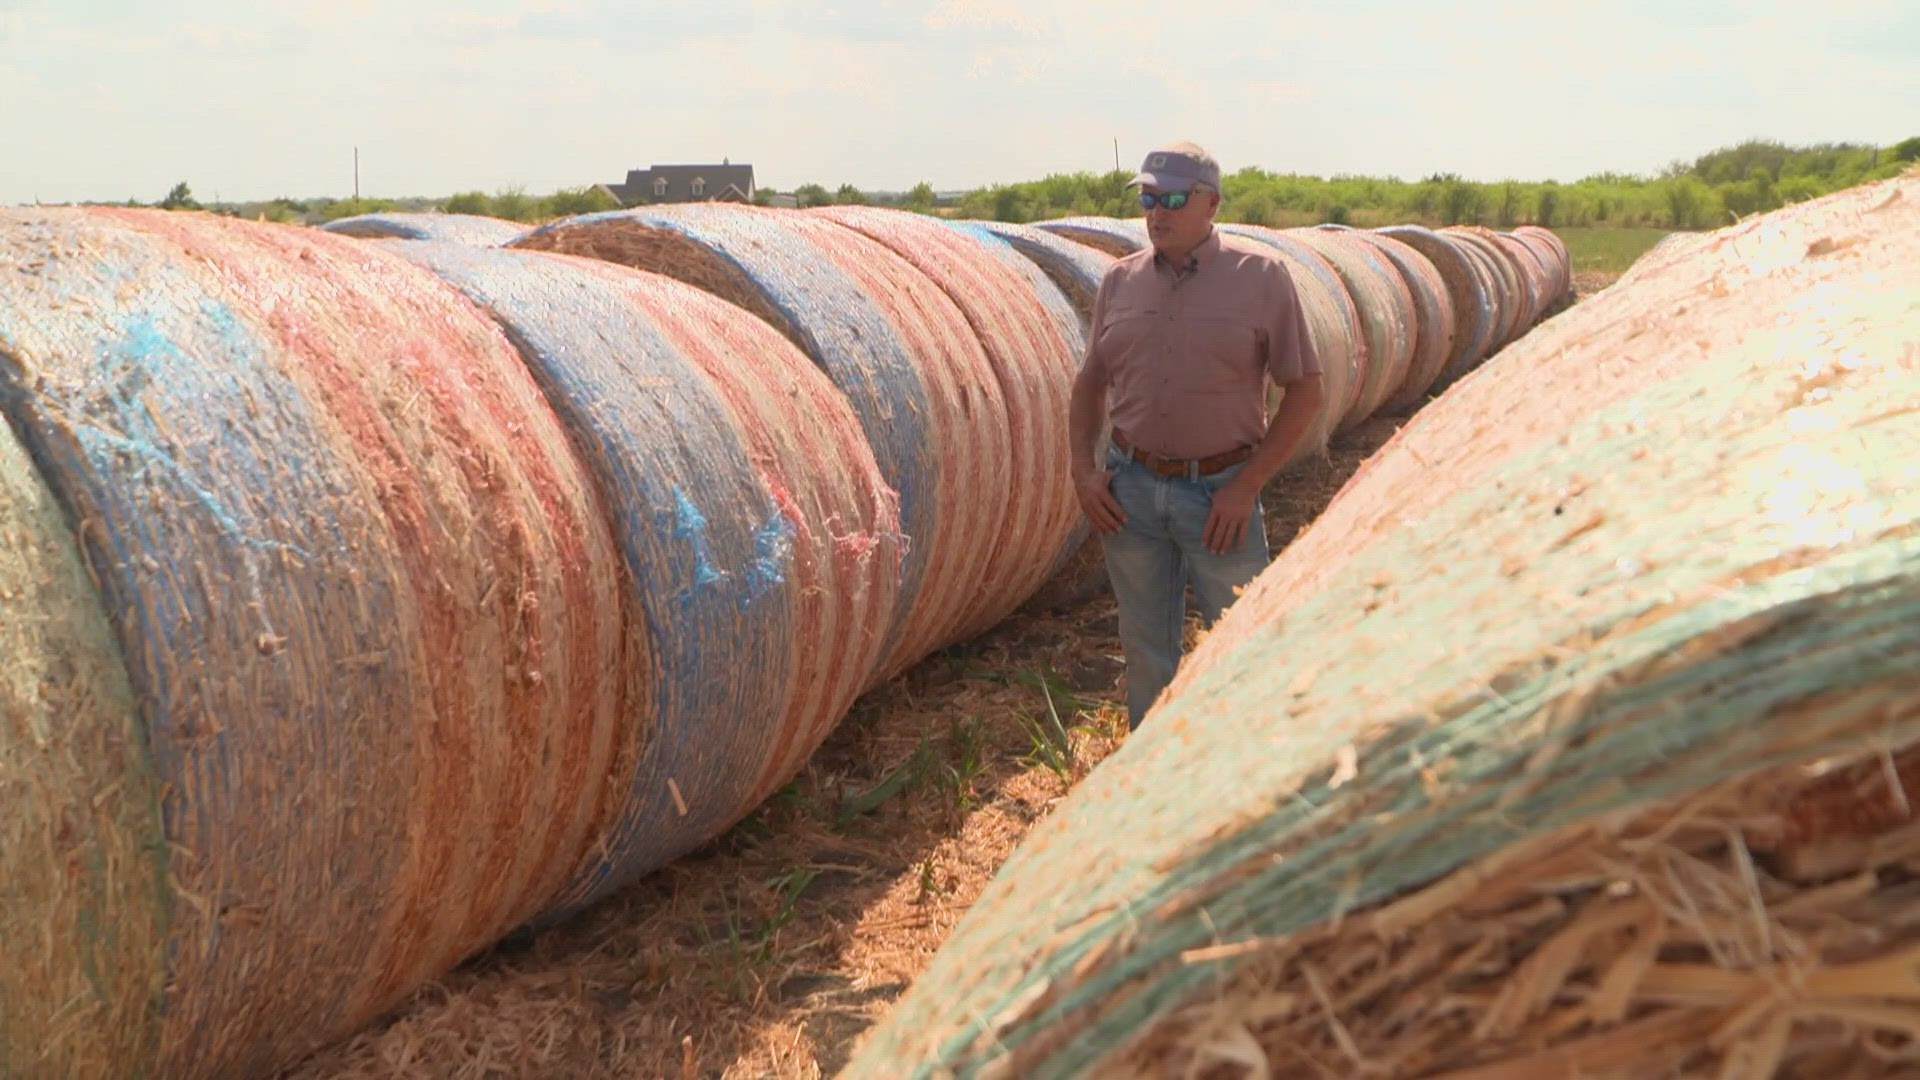 Prices for hay bales have more than doubled because of the extreme weather -- which has forced ranchers to sell cattle.